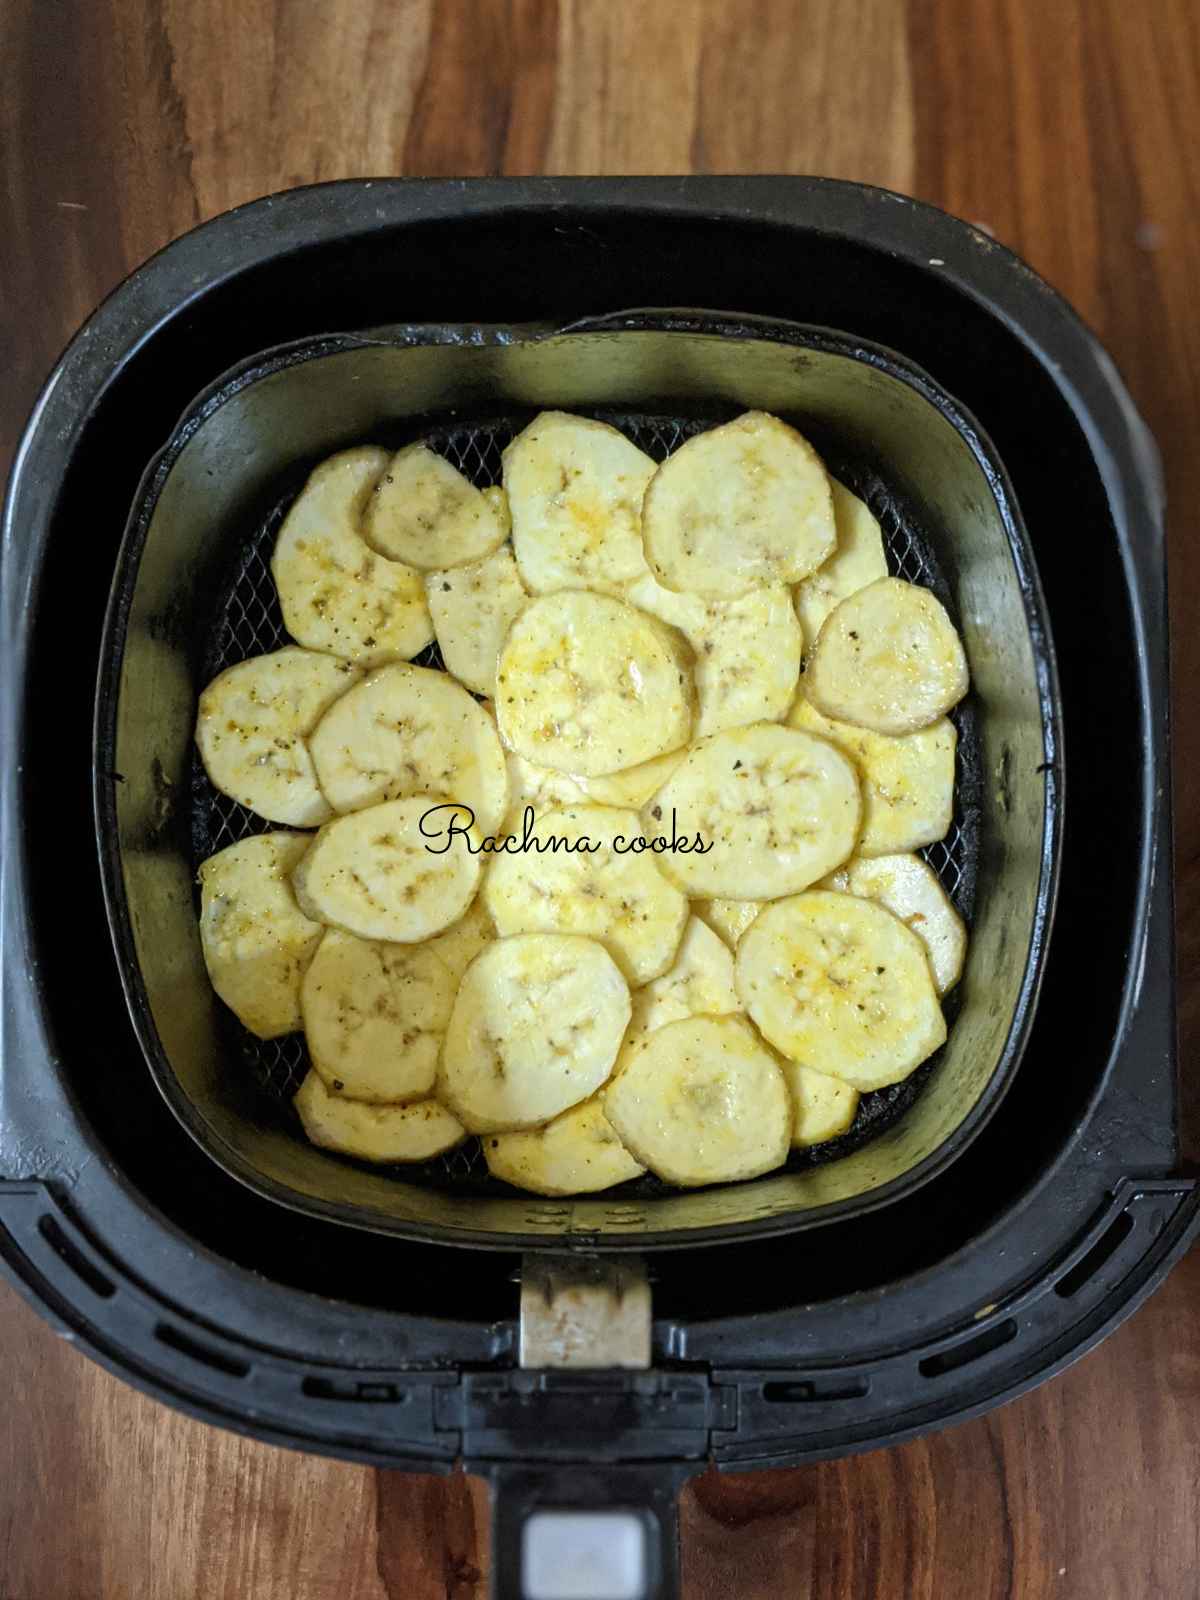 Banana chips tossed with seasoning and oil placed in air fryer basket.